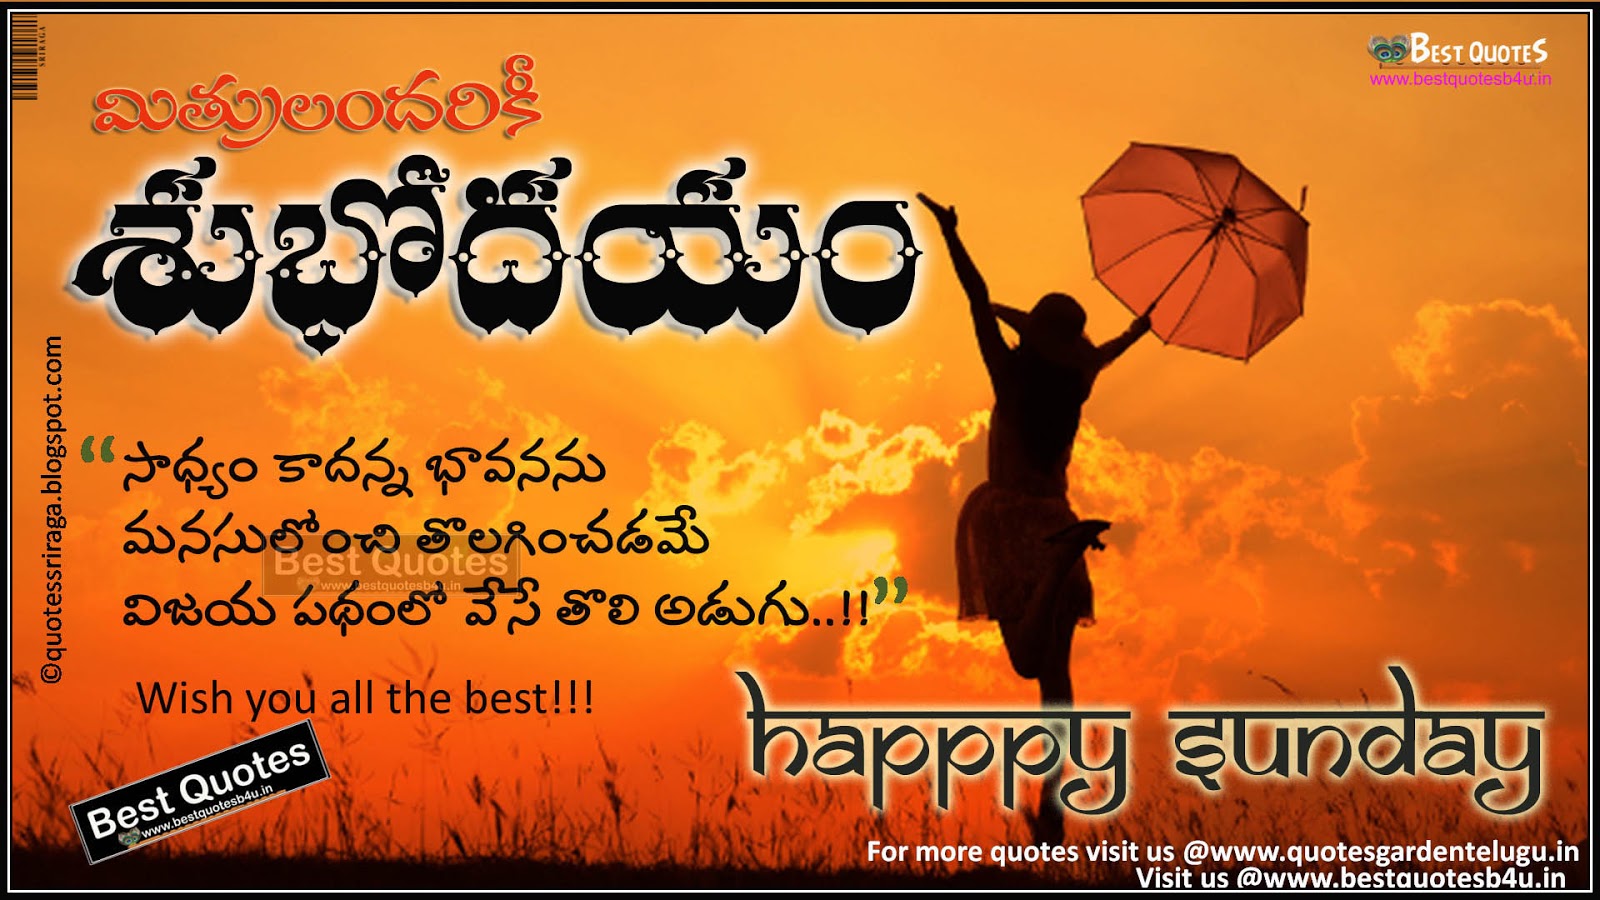 telugu happy sunday sms with inspirational quotes | Like Share Follow